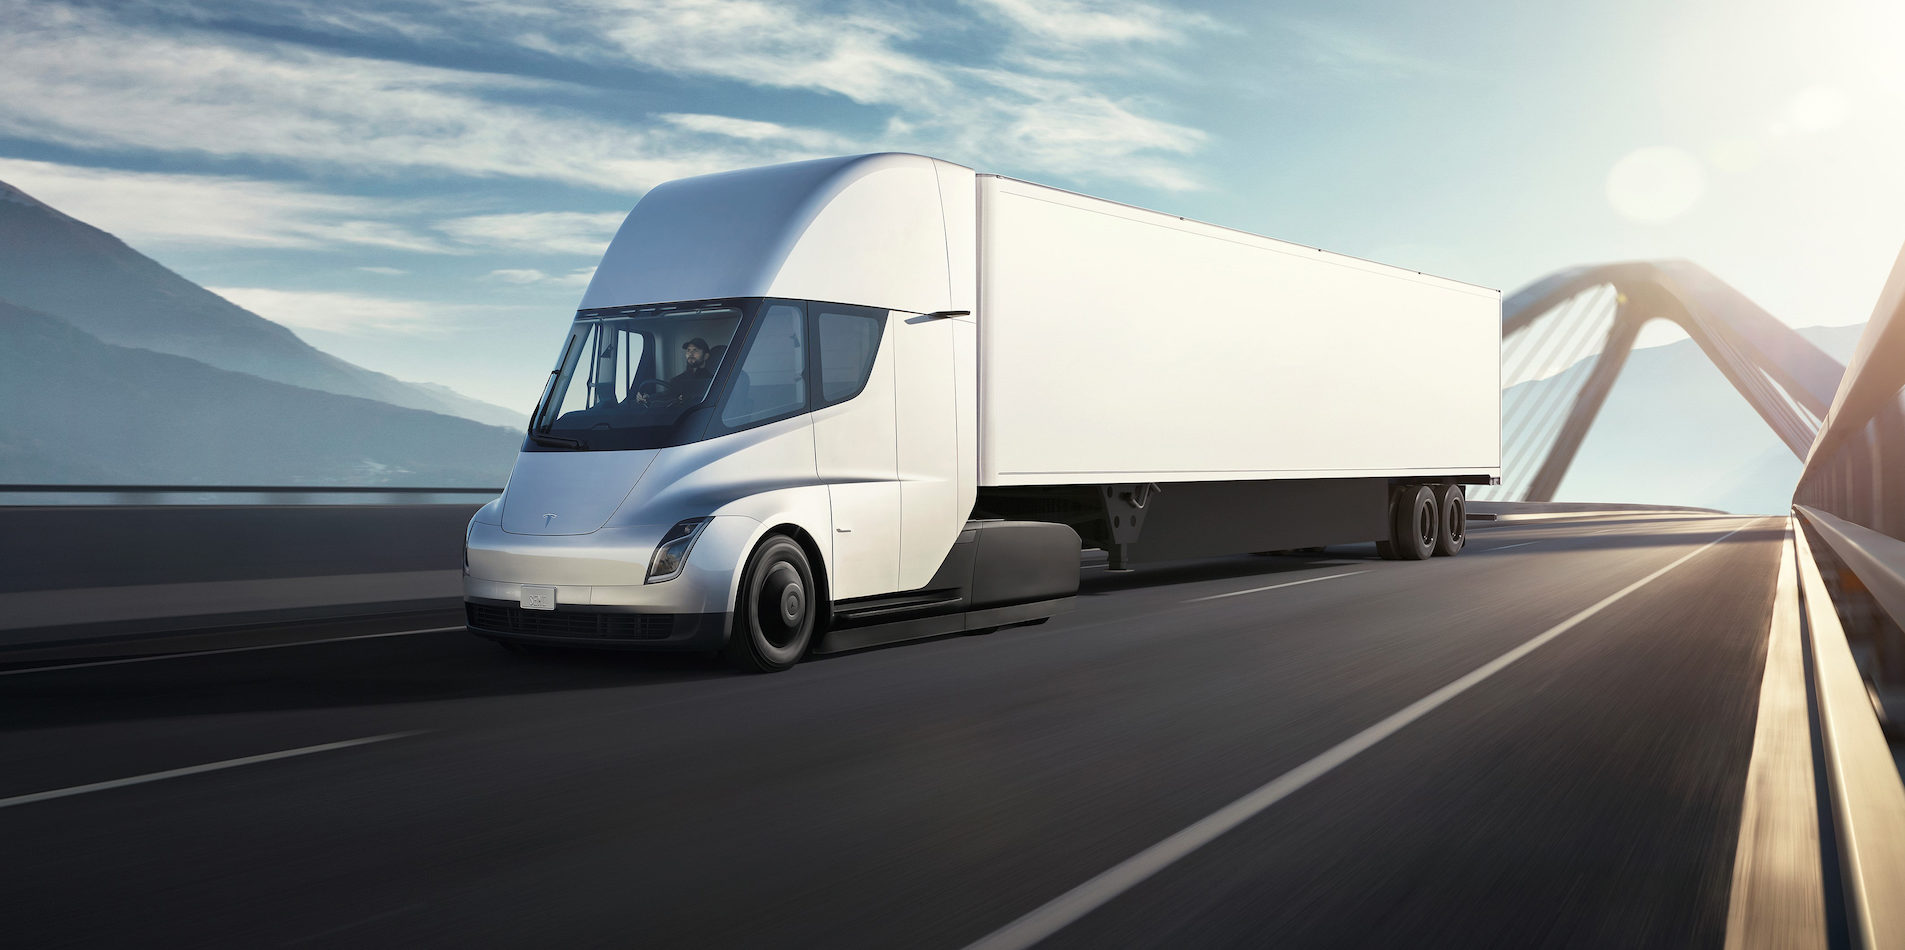 Tesla and rival Nikola listed among most innovative and disruptive companies in freight